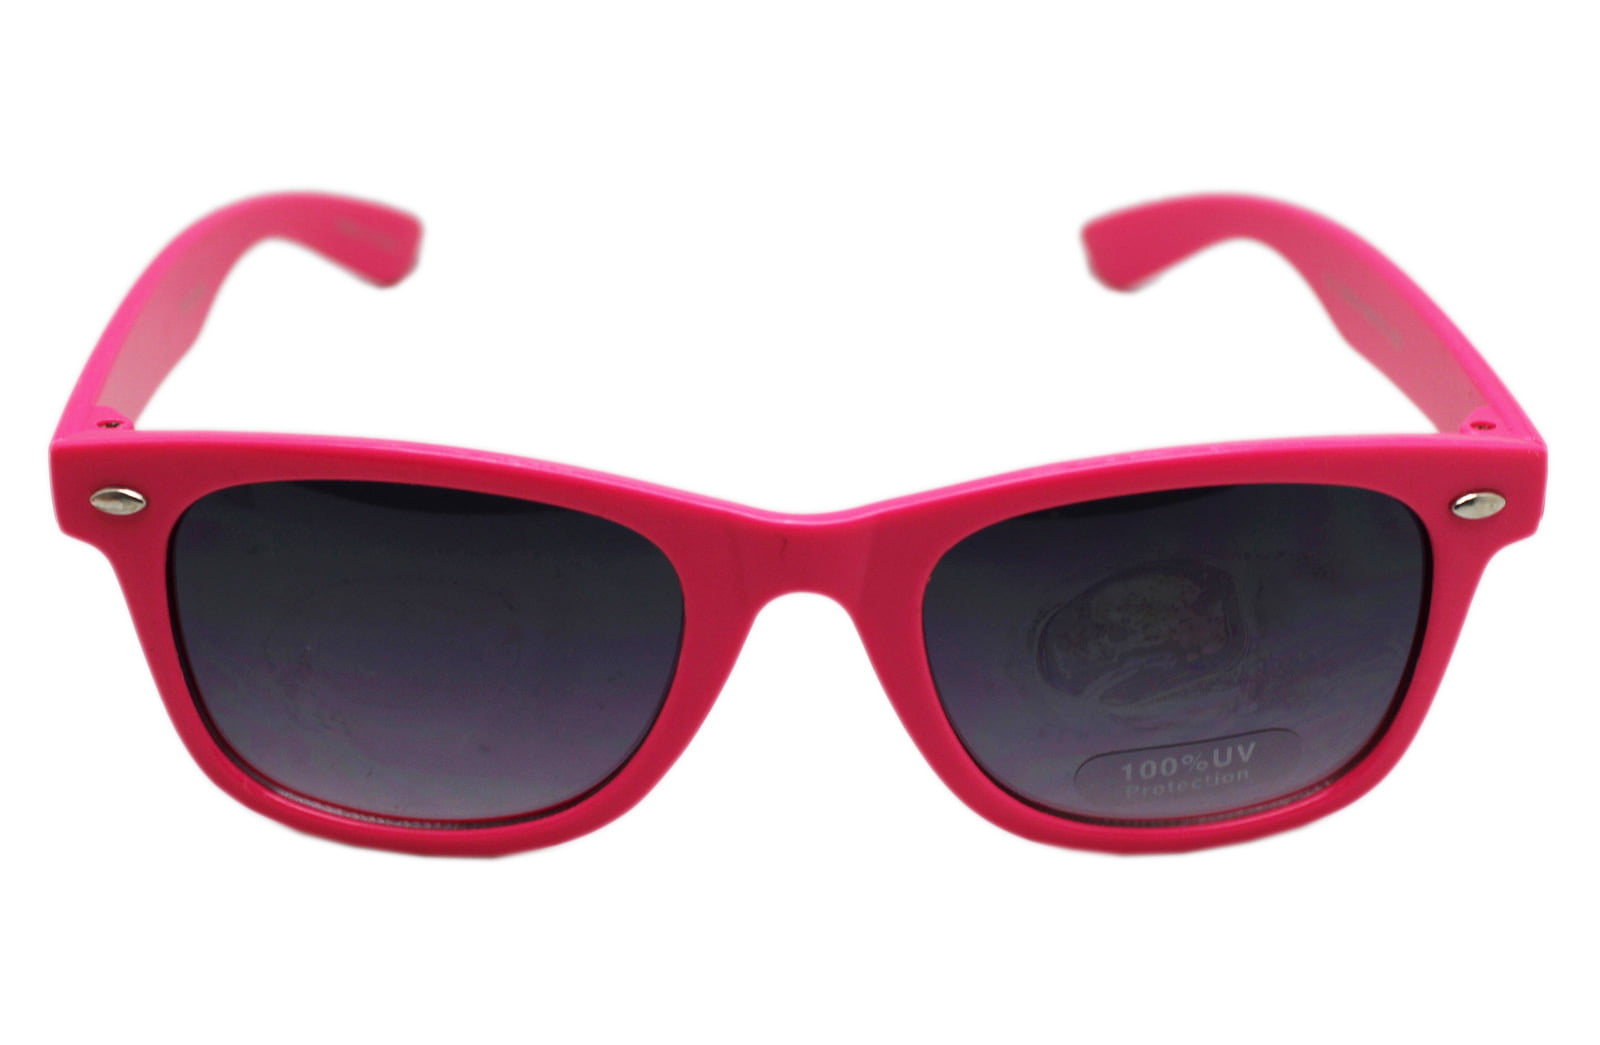 Sunglasses Small Size Pink Girls Sunglasses With Clear Carrying Bag 